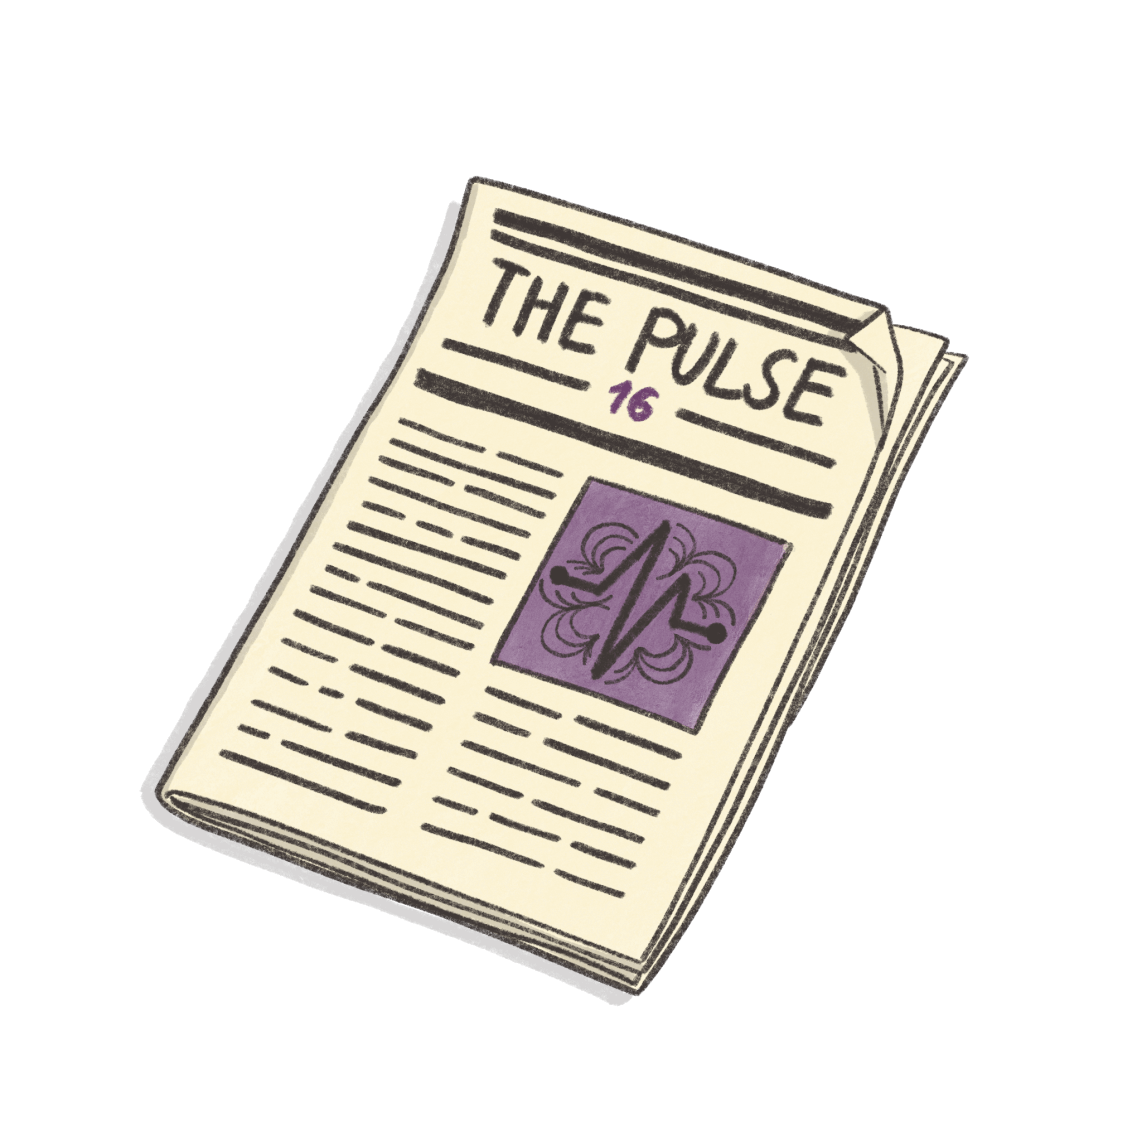 The Apoio Pulse – Issue 16 image